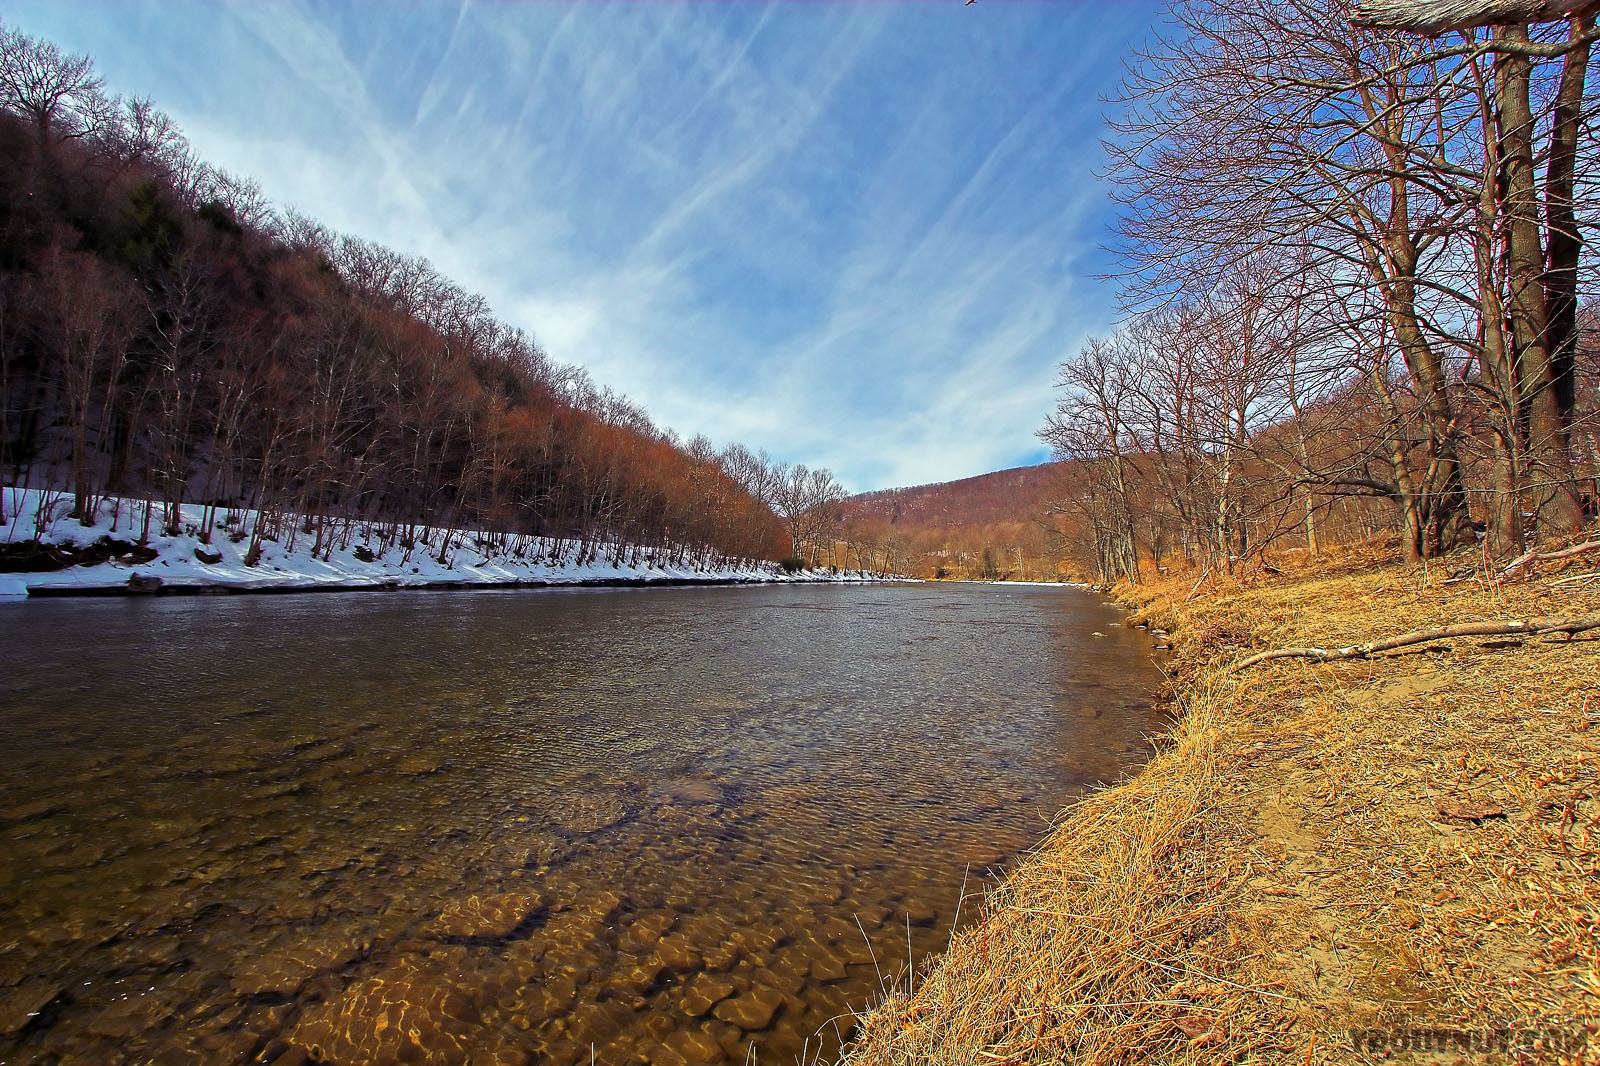 This is Cairn's Pool on the Beaverkill, possibly the most famous pool in all of trout fishing. From the Beaverkill River in New York.